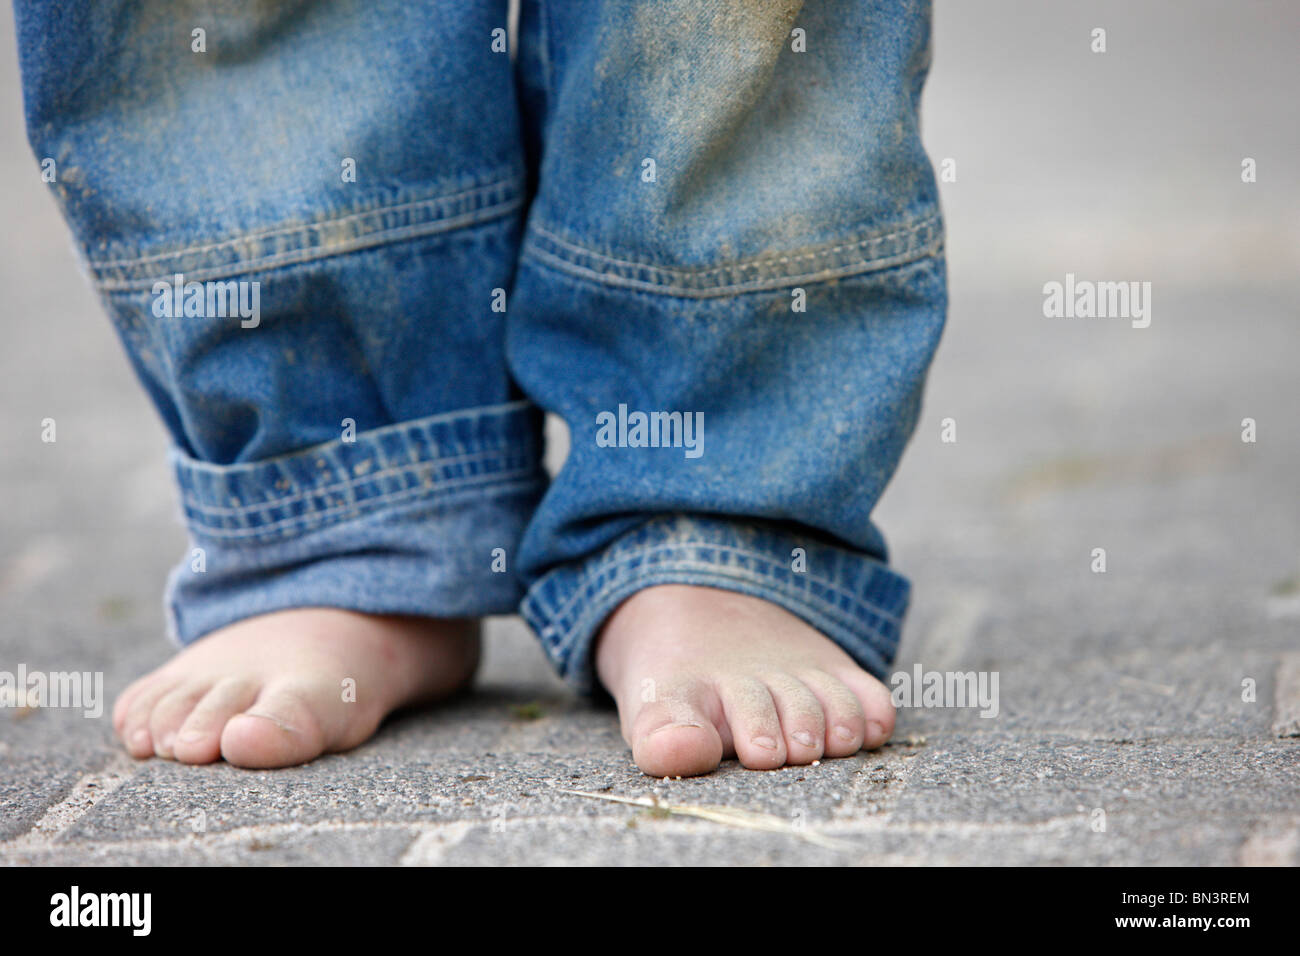 dirty feet of a child, Germany Stock Photo